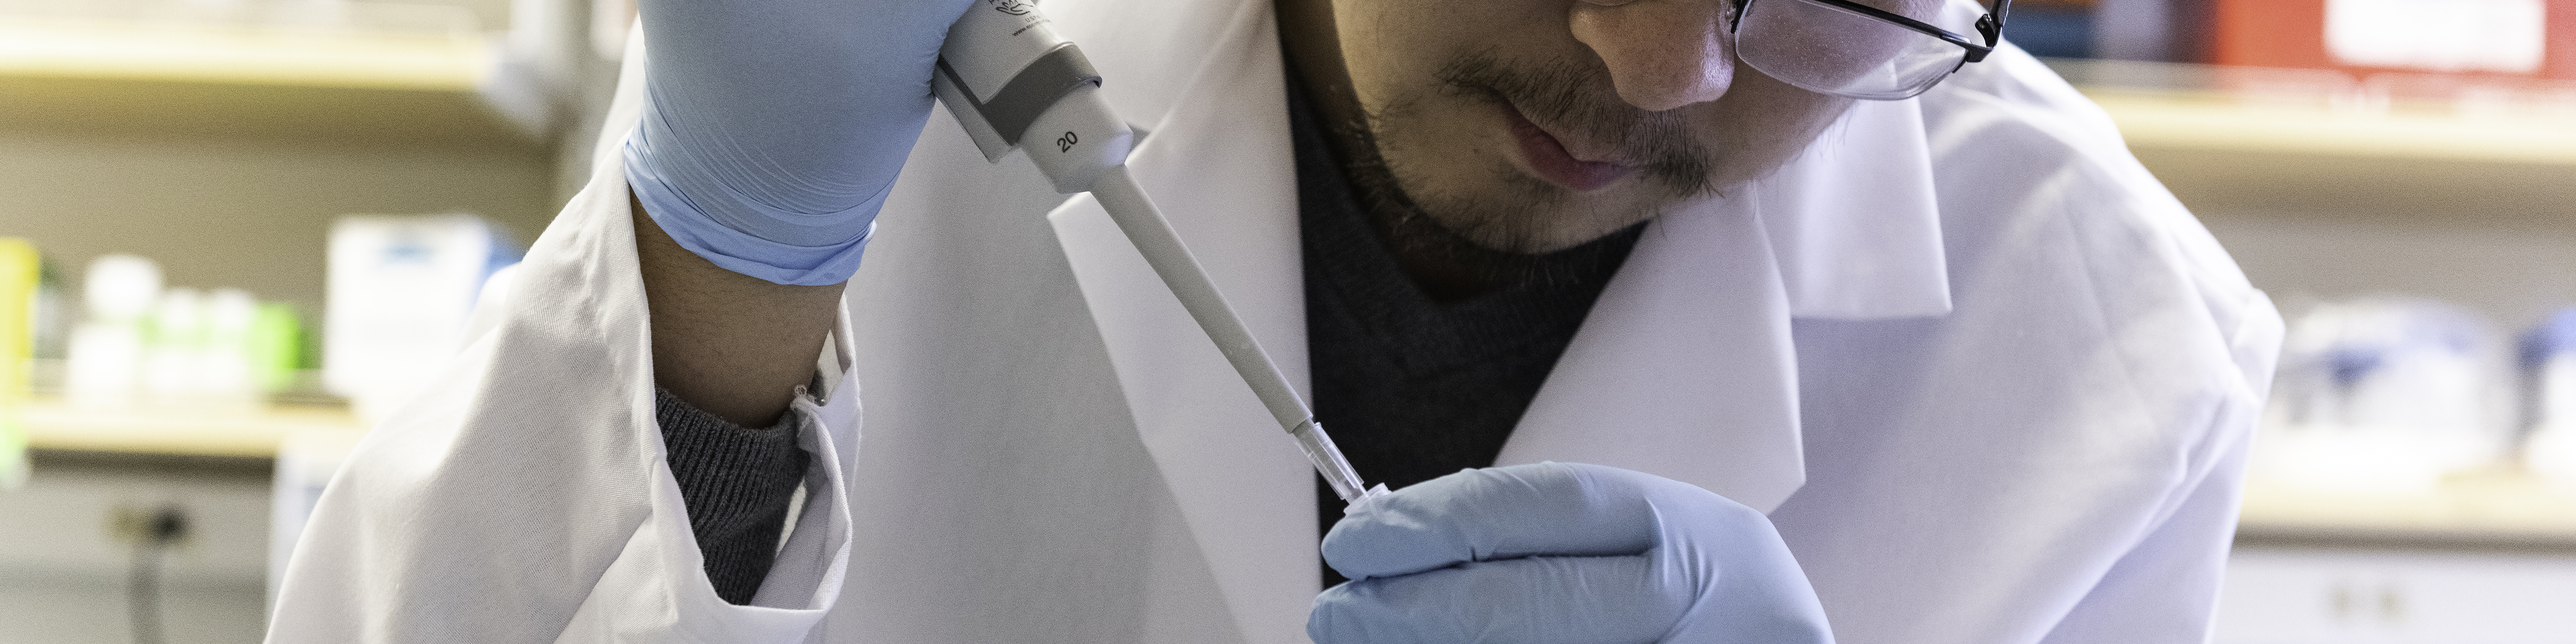 a research associate at the university of texas holds a syringe in one hand and a test tube in another while working on researching coronavirus treatment